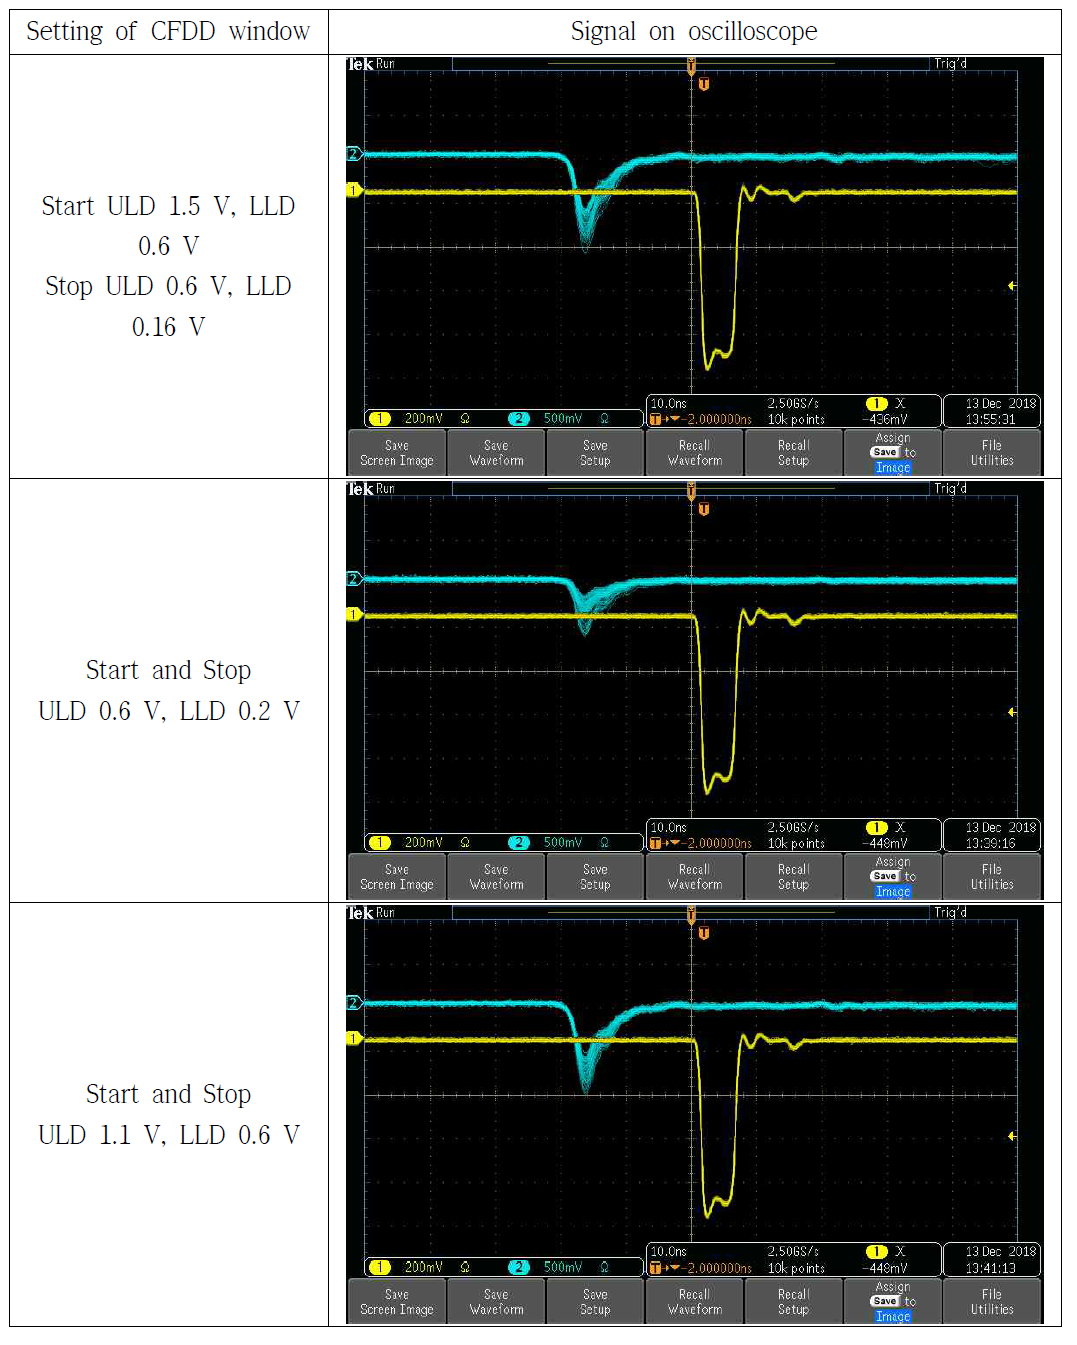 Check the PMT anode signal according to the CFDD window setting